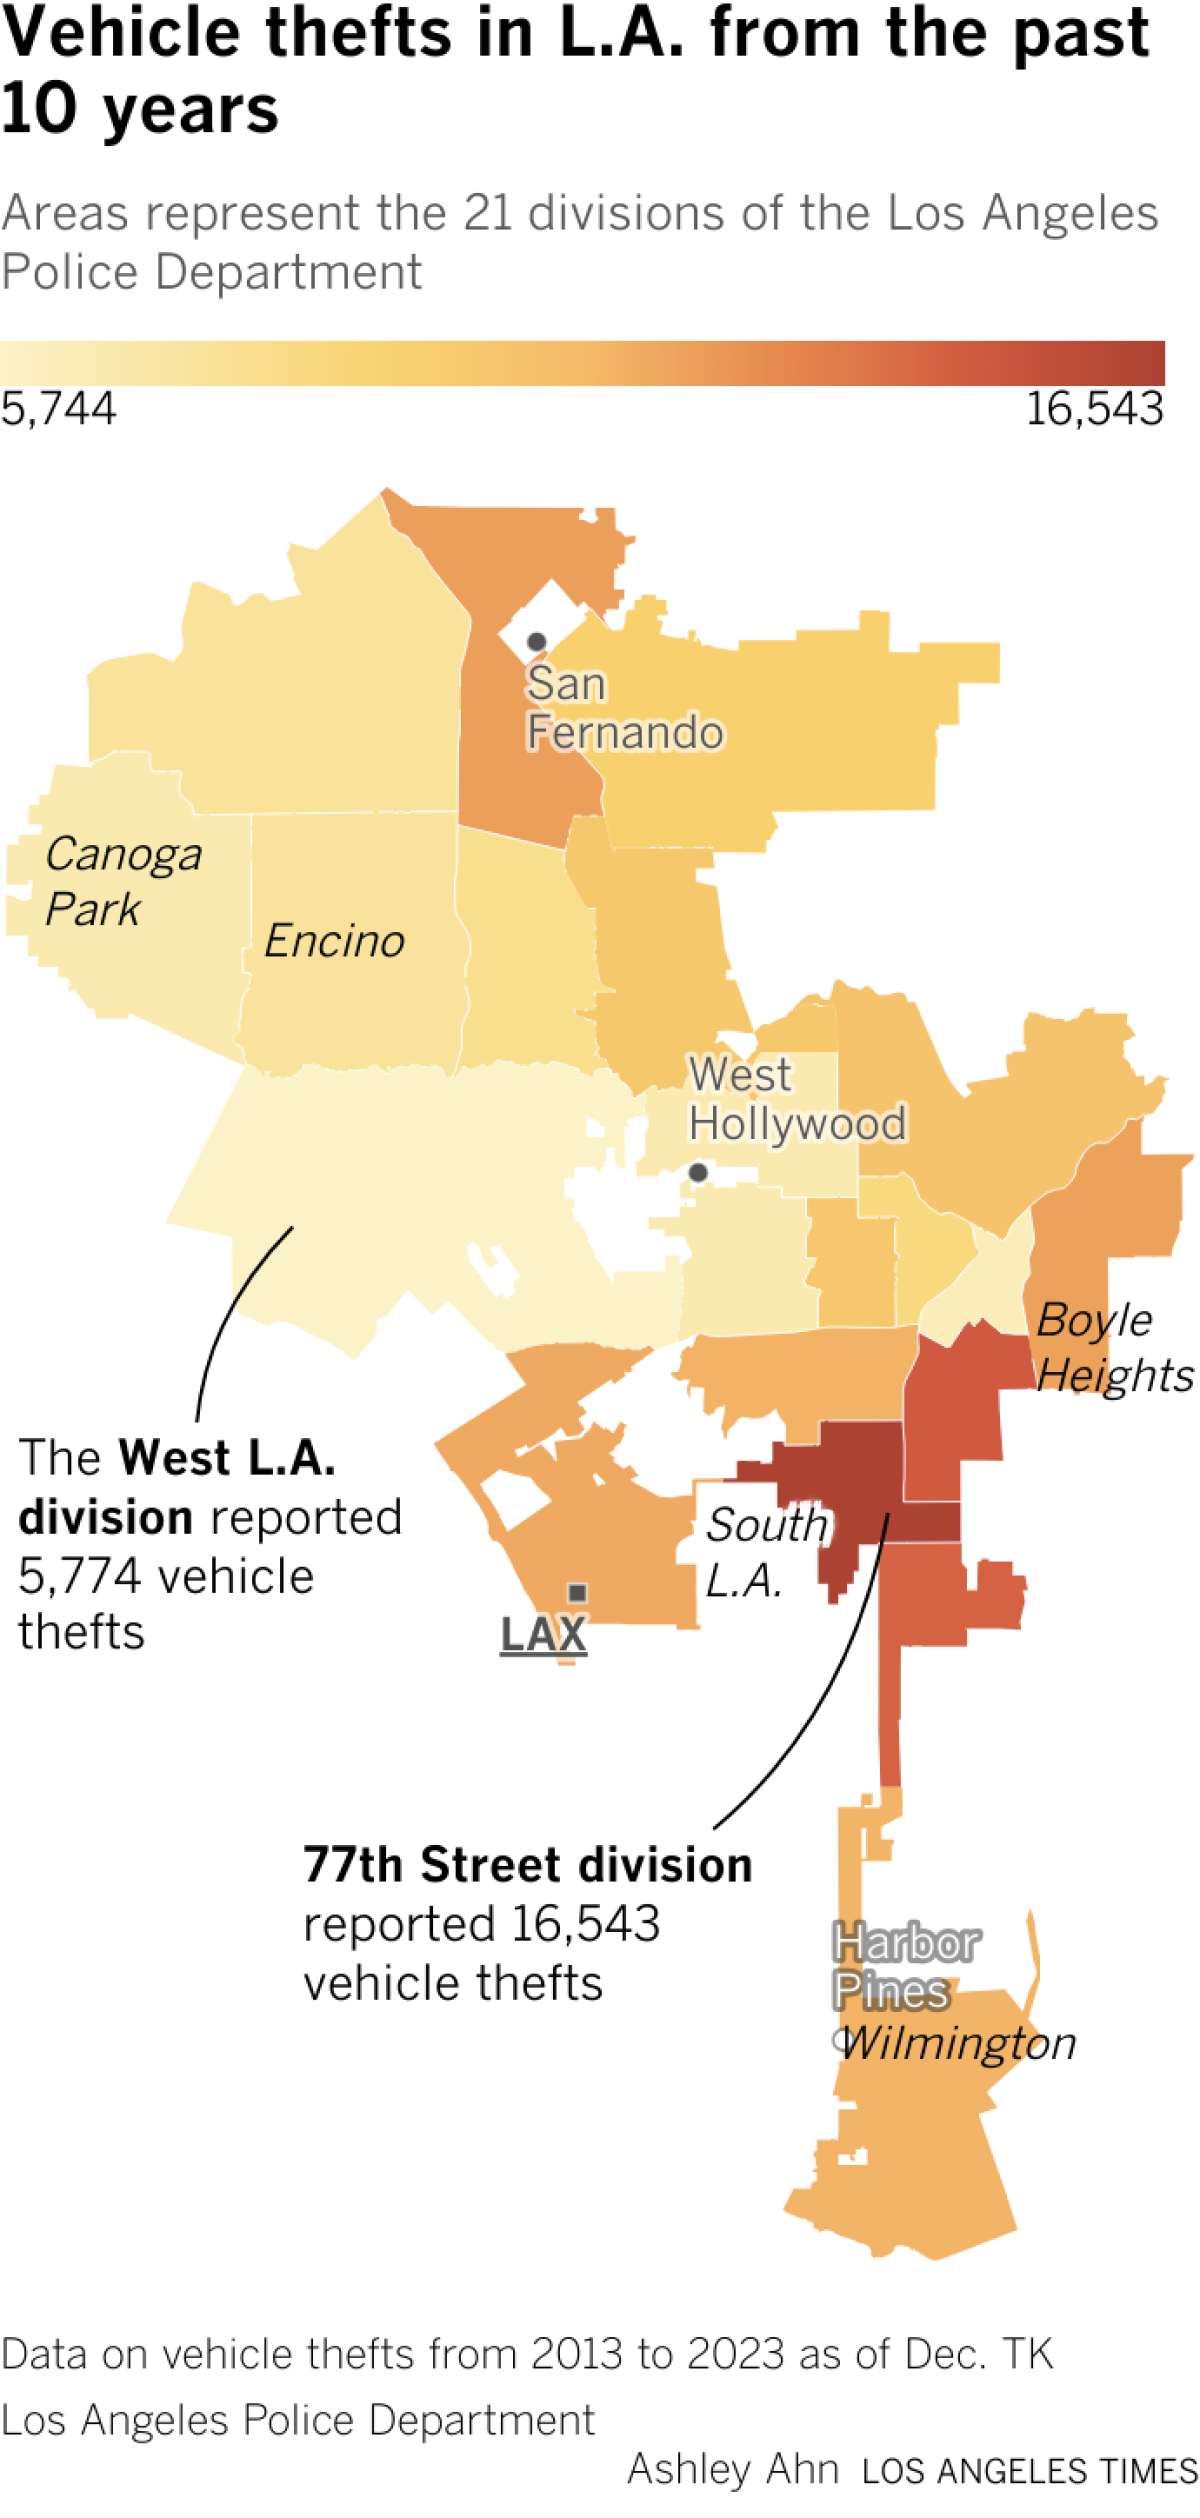 The map shows Los Angeles broken down into the 21 divisions of the Los Angeles Police Department. The 77th Street division reported the greatest number of vehicle thefts, while the West L.A. division reported the least number of vehicle thefts since 2013.